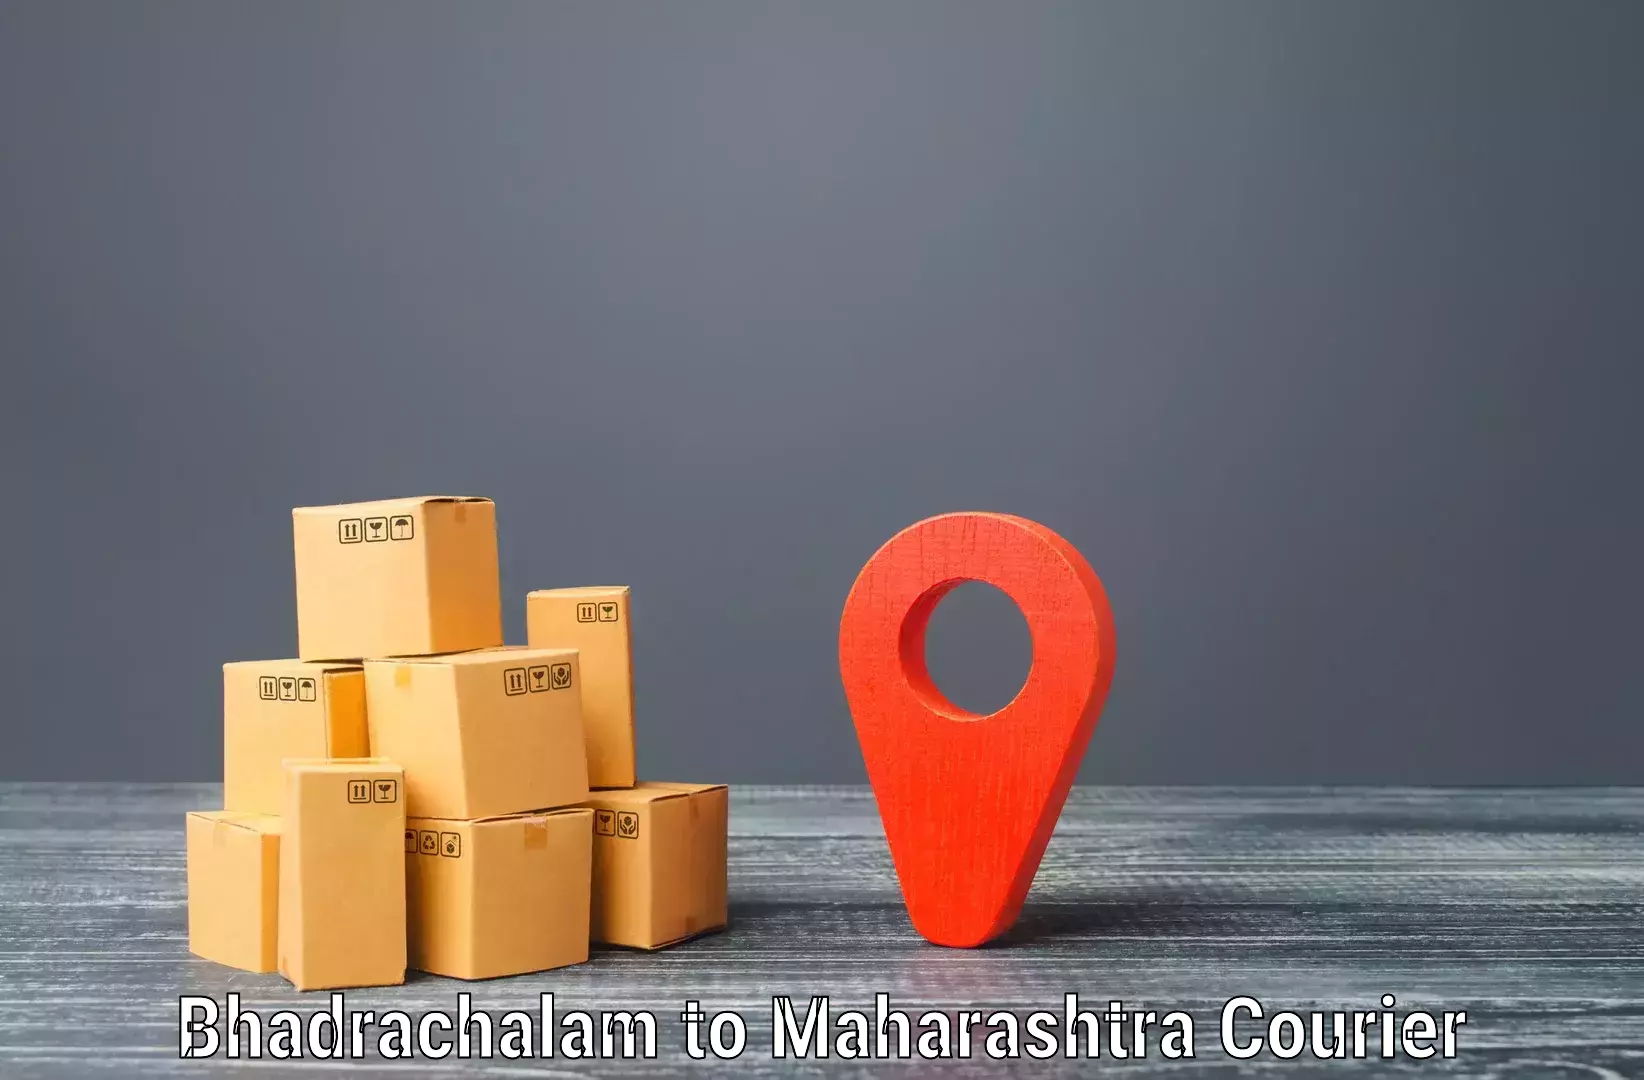 Express delivery network in Bhadrachalam to Bhandara